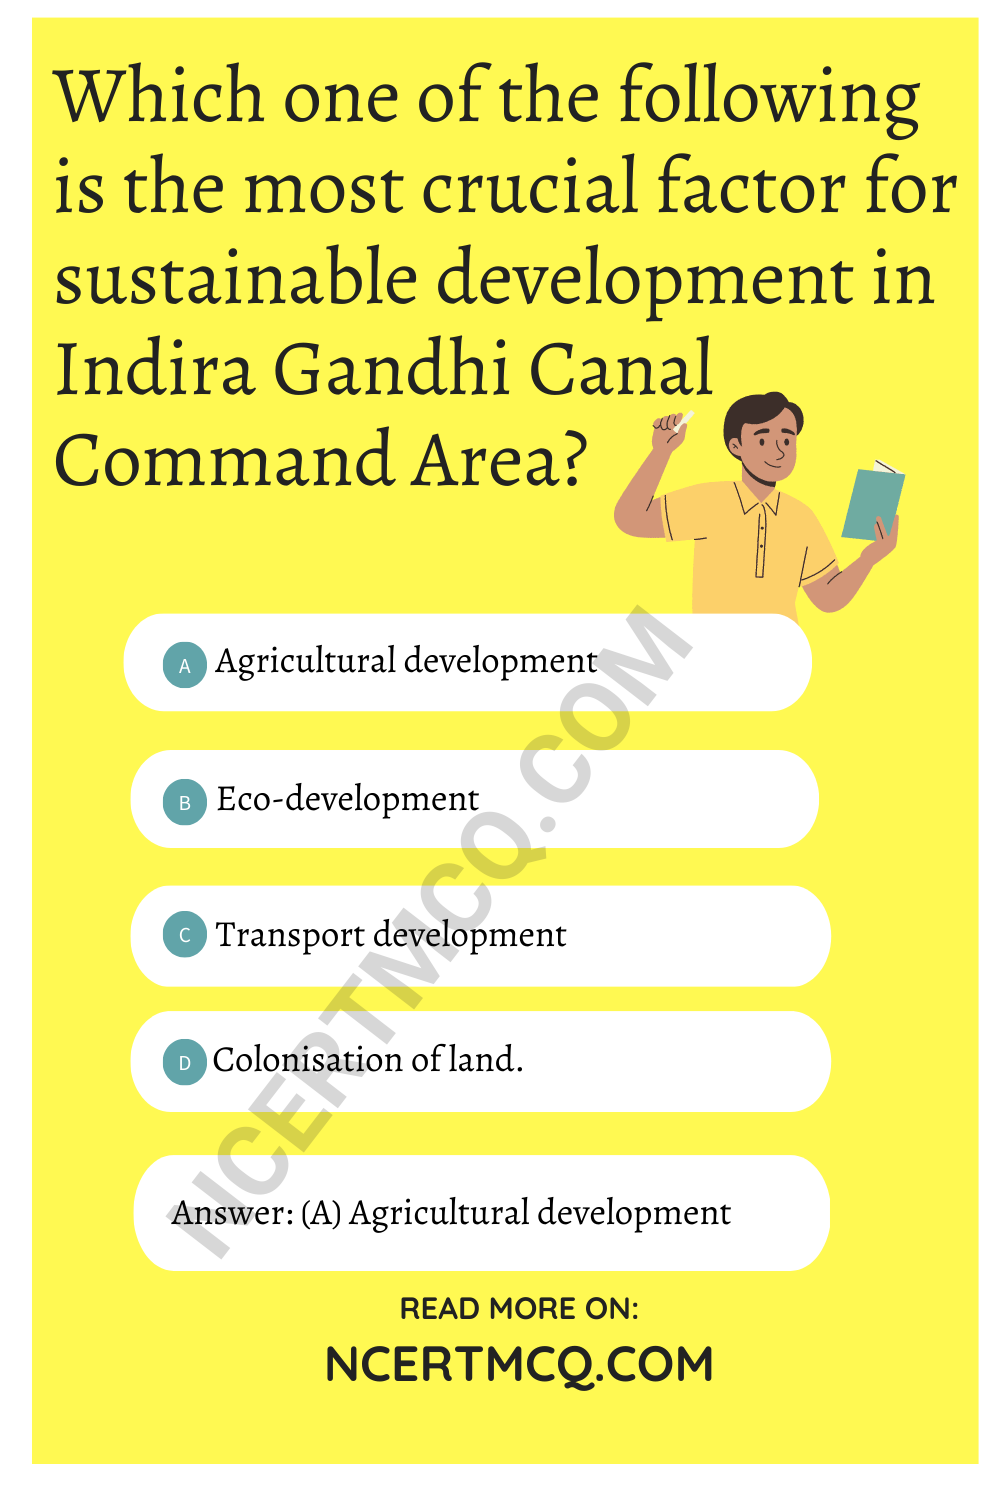 Which one of the following is the most crucial factor for sustainable development in Indira Gandhi Canal Command Area?